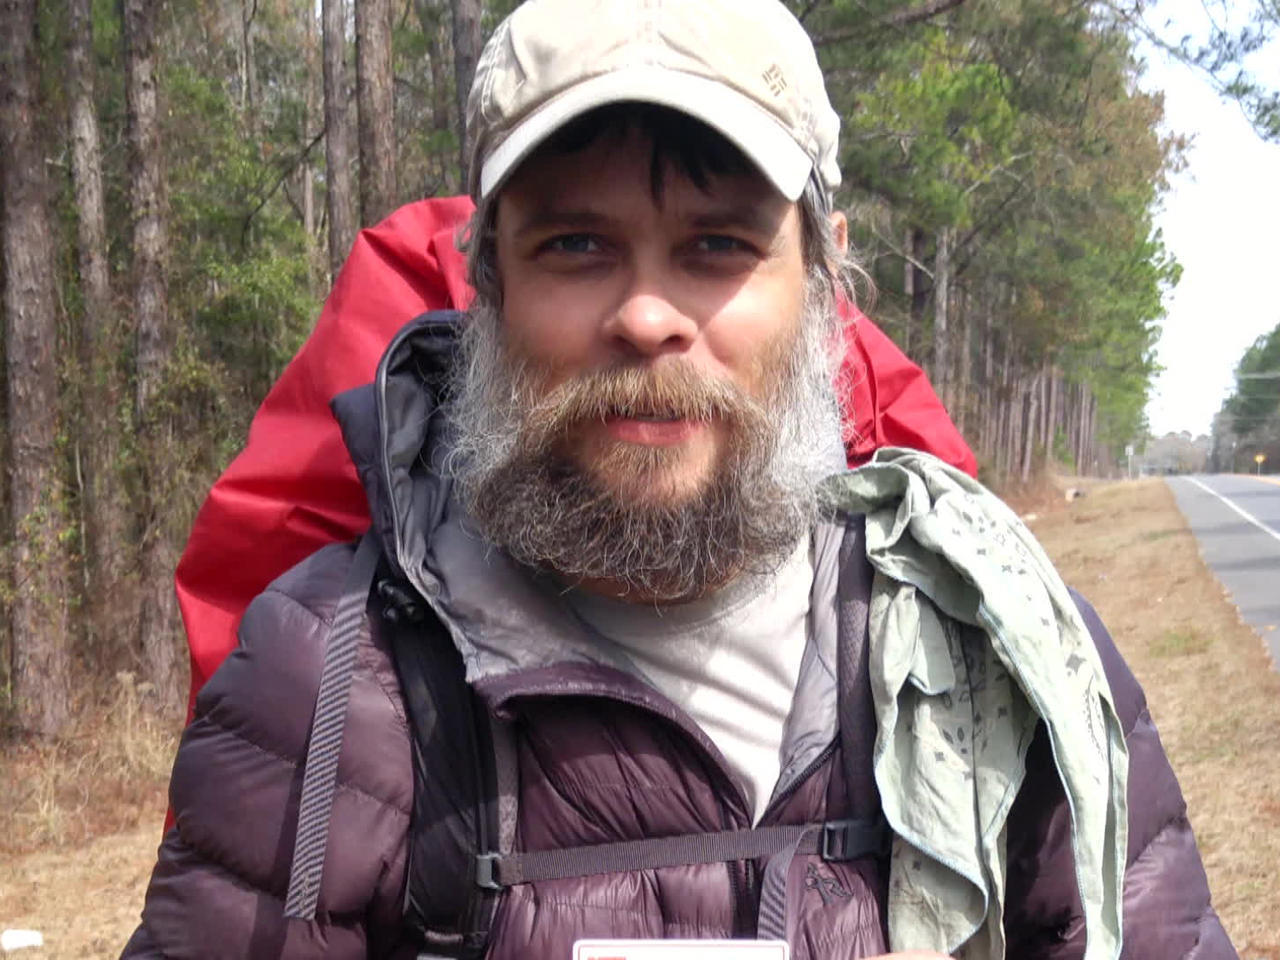 Solving the mystery of the Appalachian hiker "Mostly Harmless" 